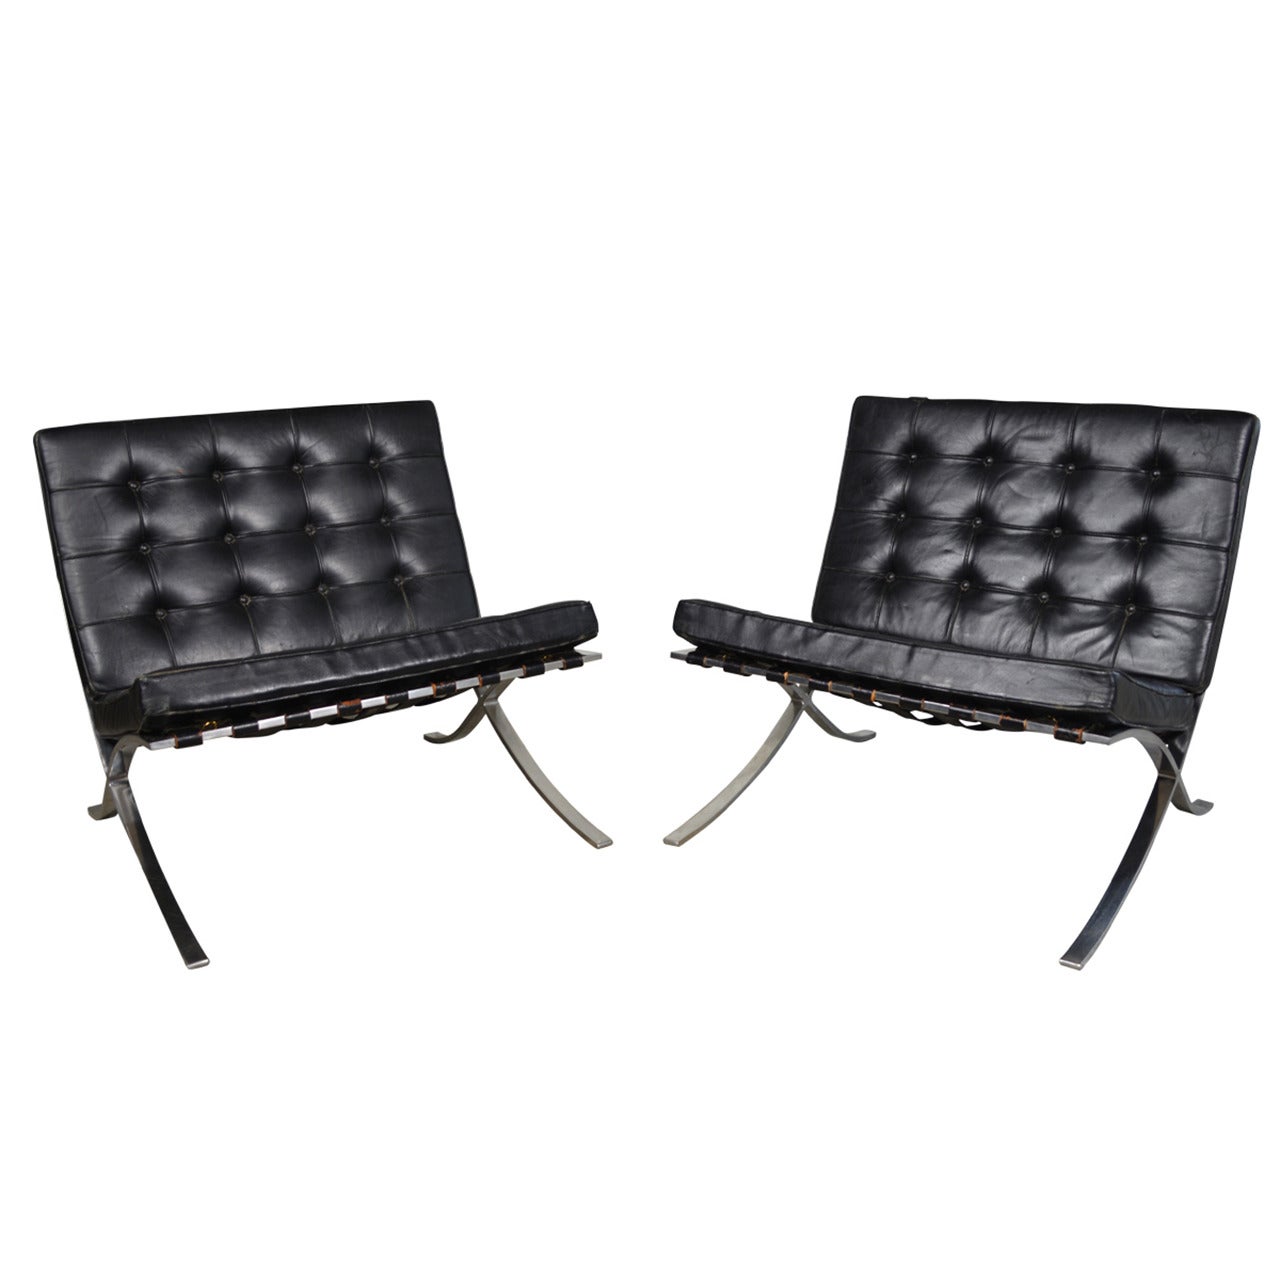 Pair of Ludwig Mies van der Rohe "Barcelona" Chairs